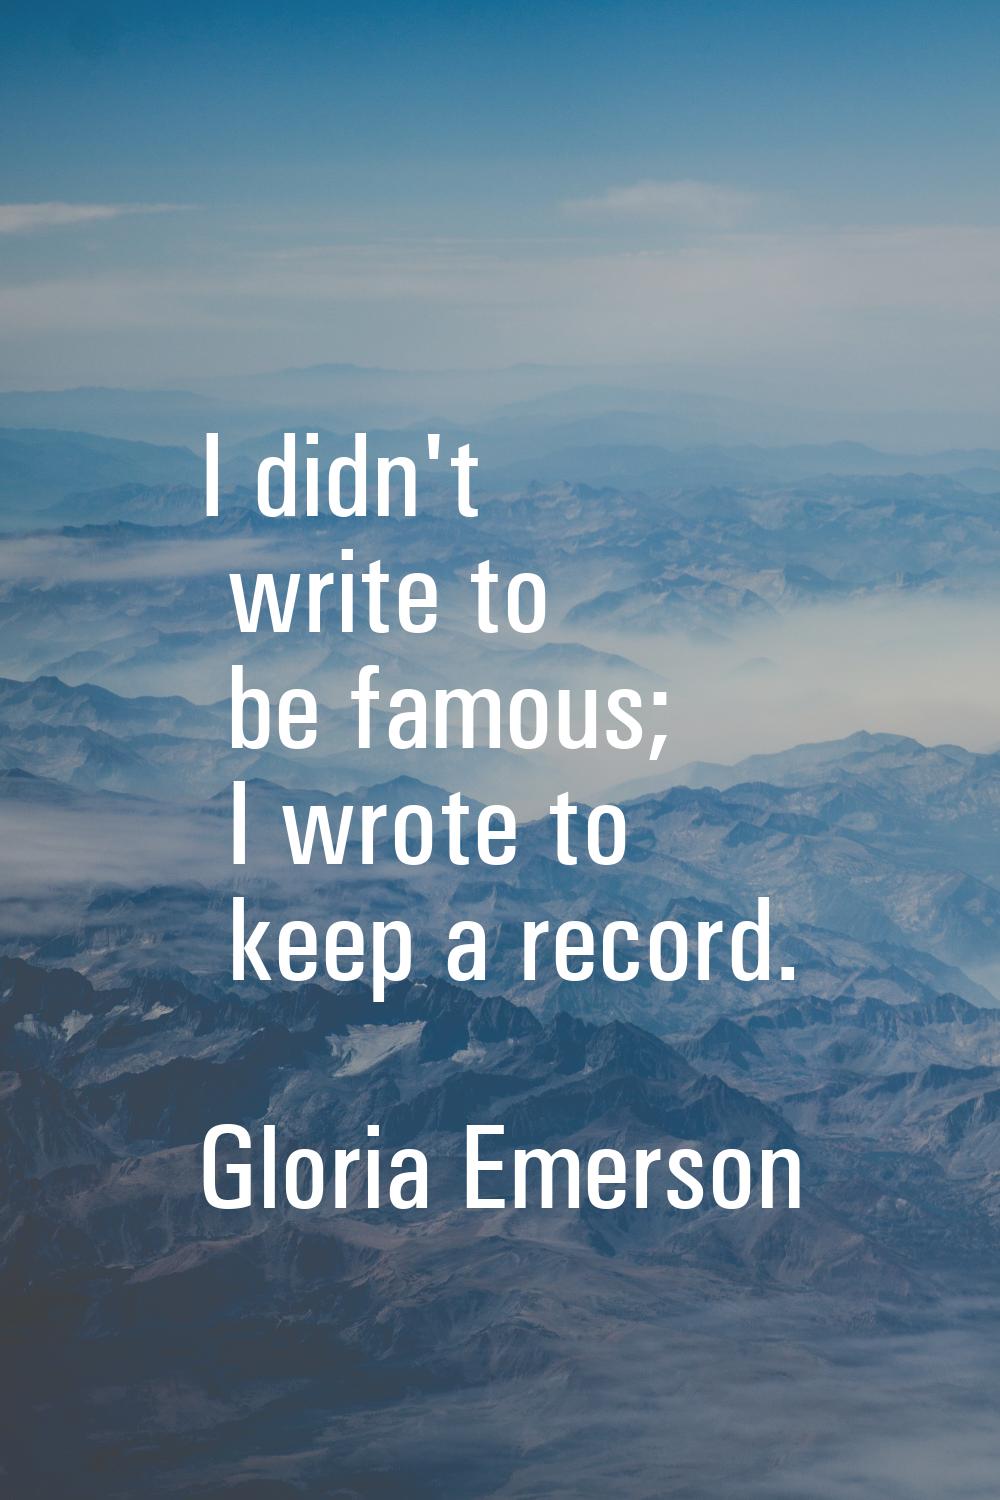 I didn't write to be famous; I wrote to keep a record.